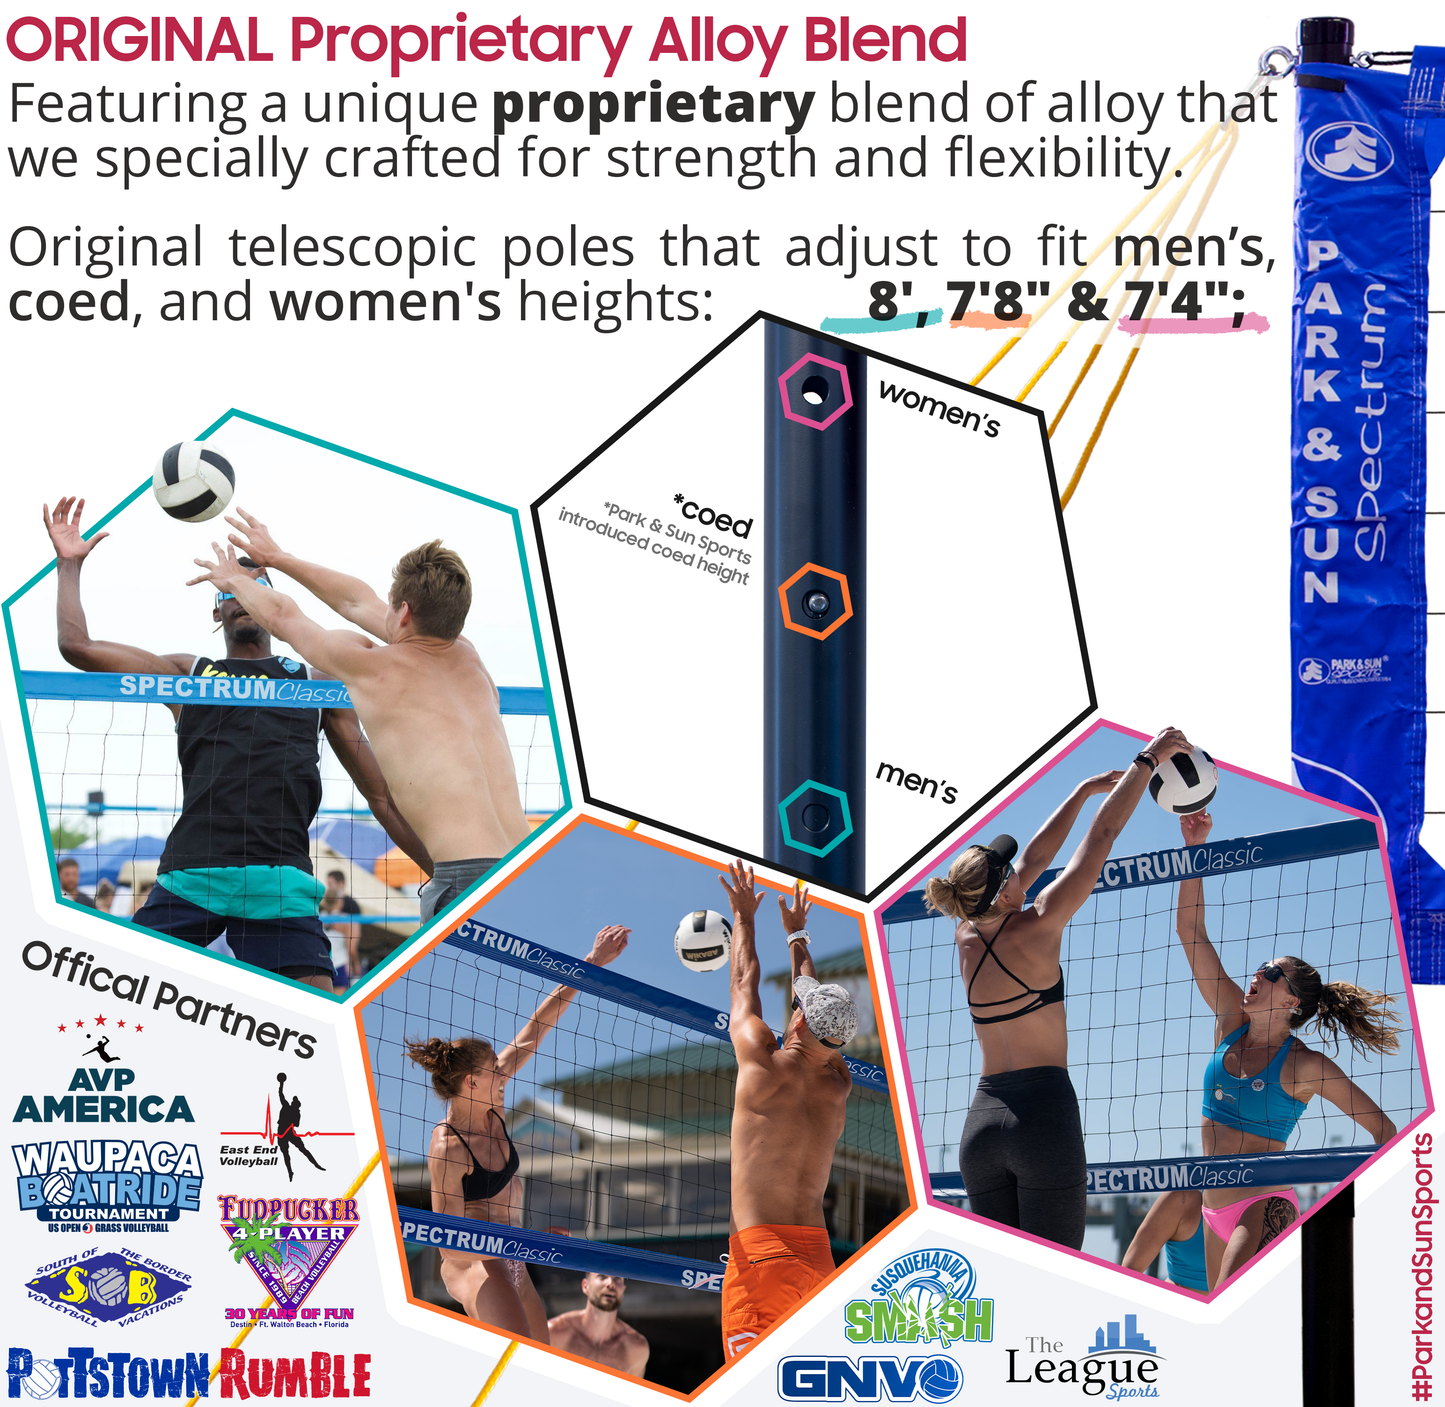 Park & Sun Sports Spectrum Classic: Portable Professional Outdoor Volleyball Net System 2-Pack